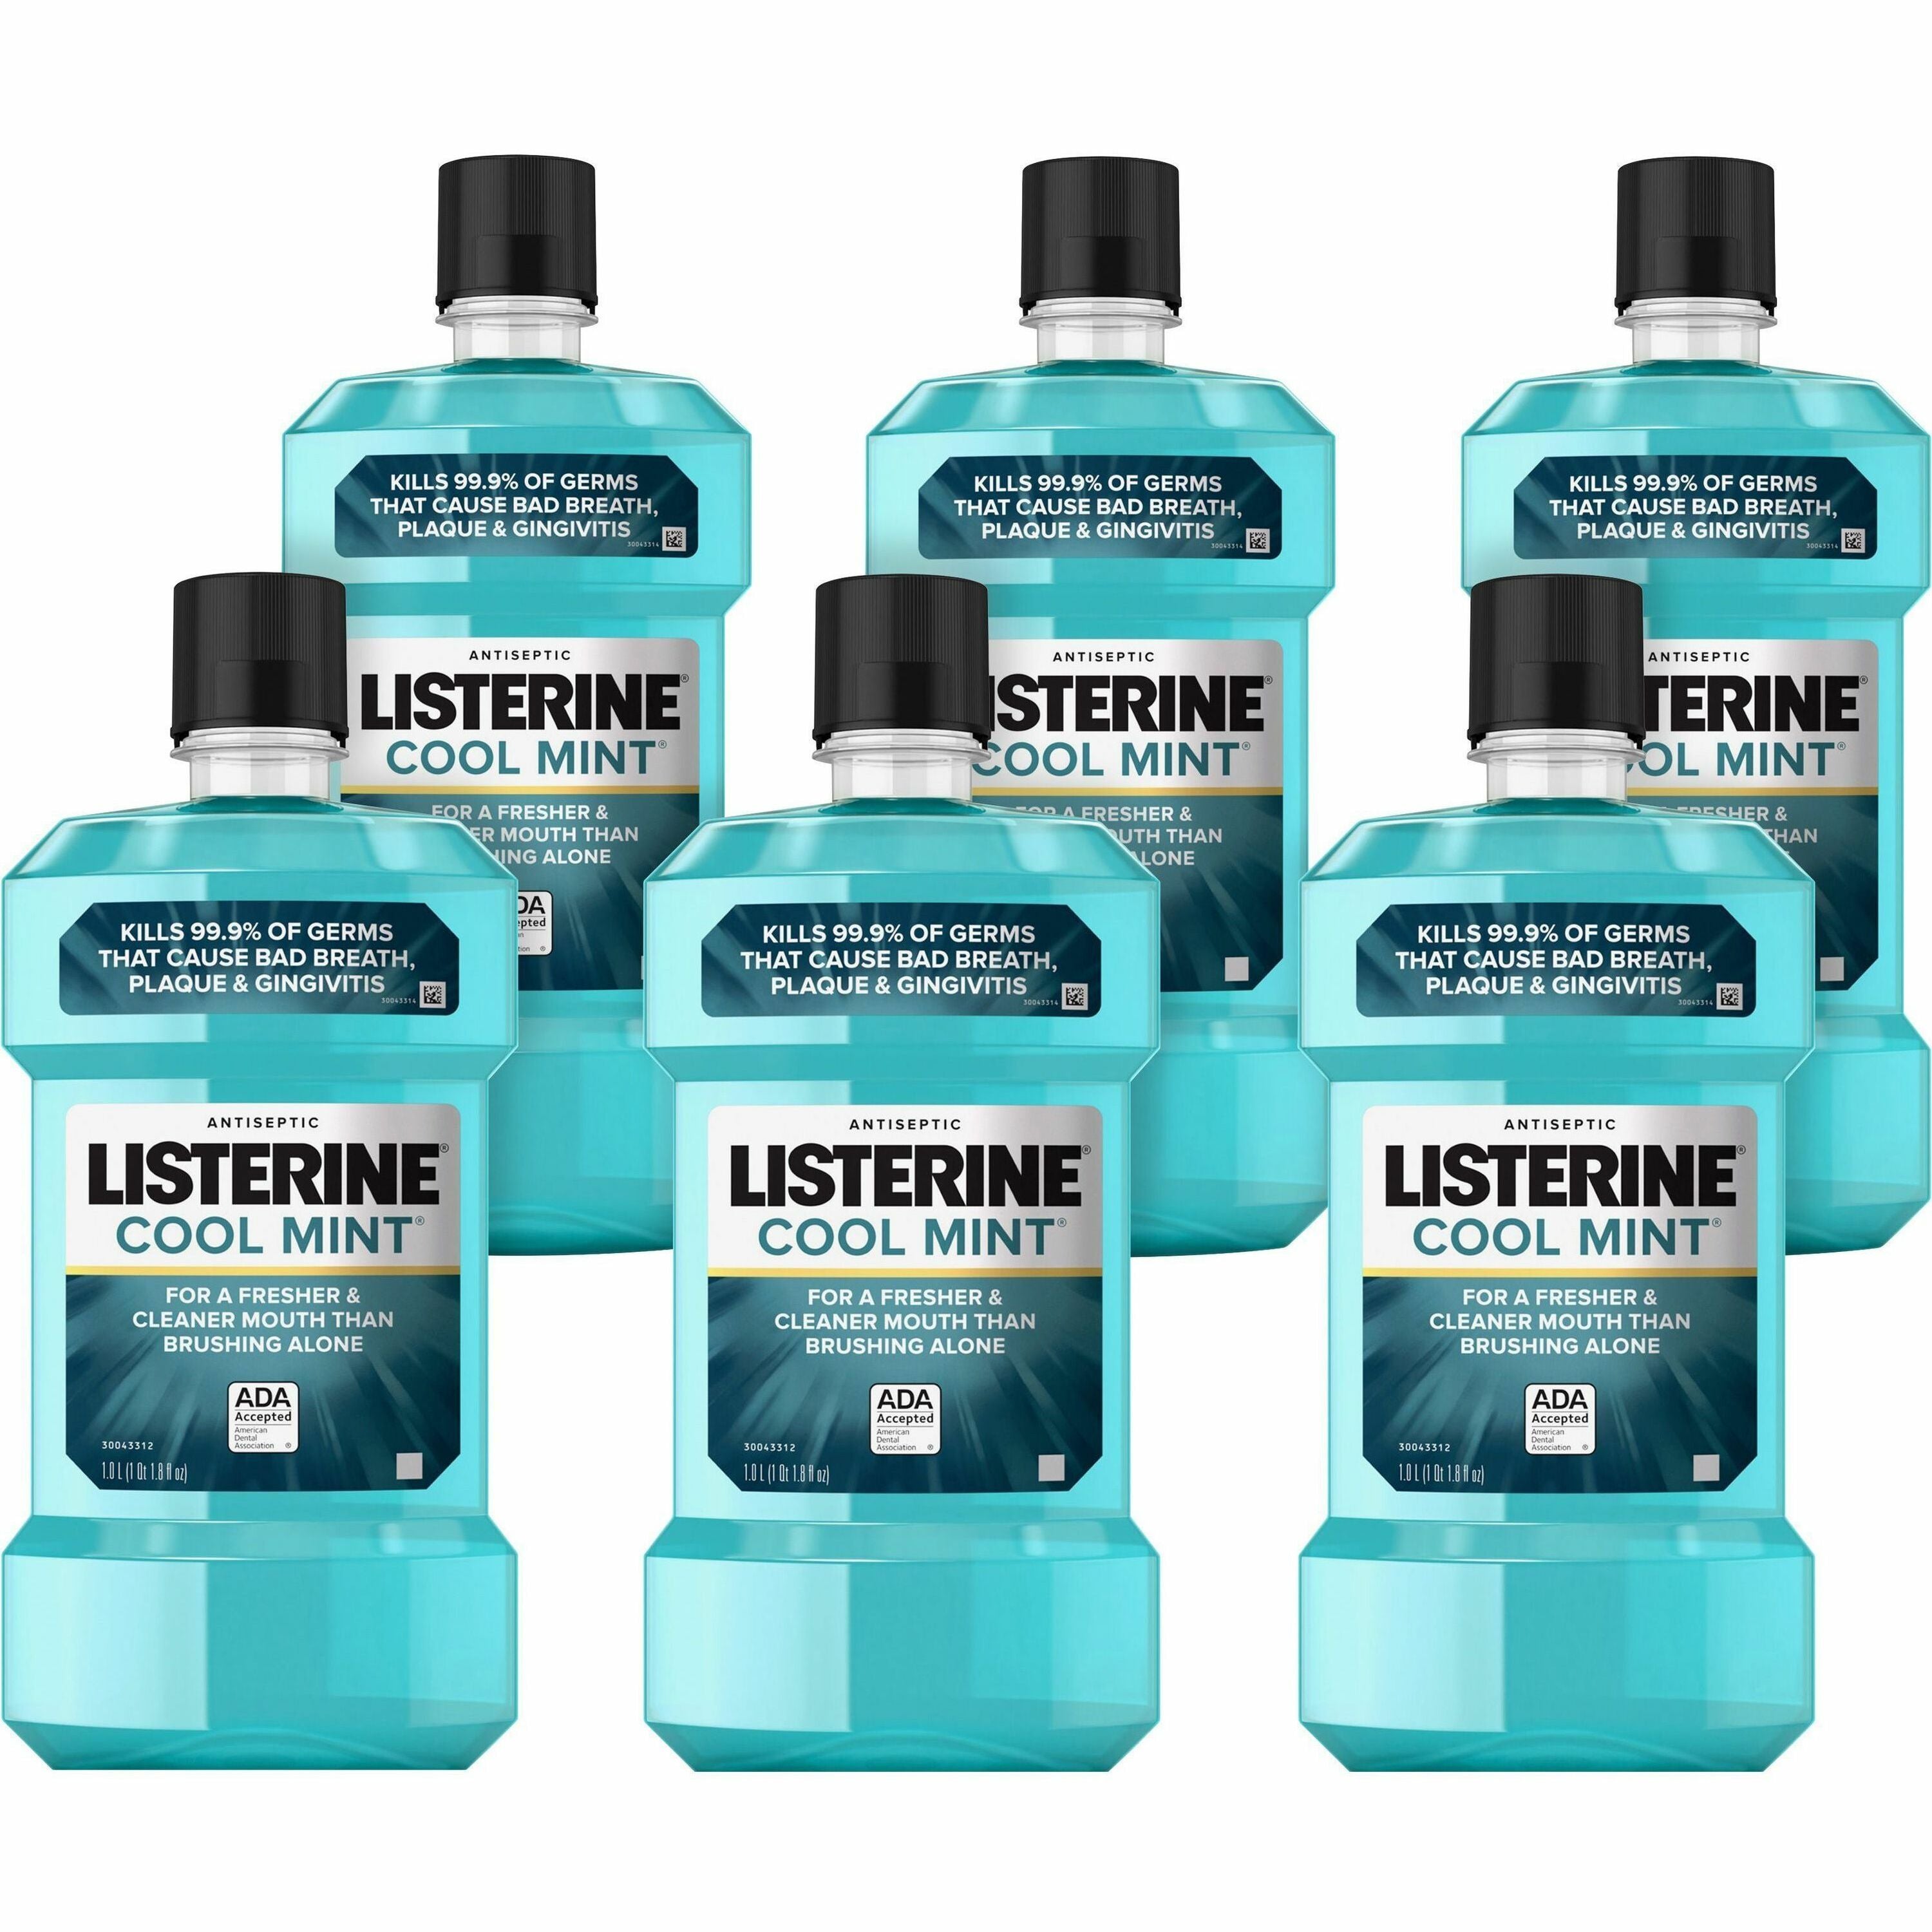 listerine-cool-mint-antiseptic-mouthwash-for-bad-breath-cleaning-cool-mint-106-quart-6-carton_joj42735ct - 1